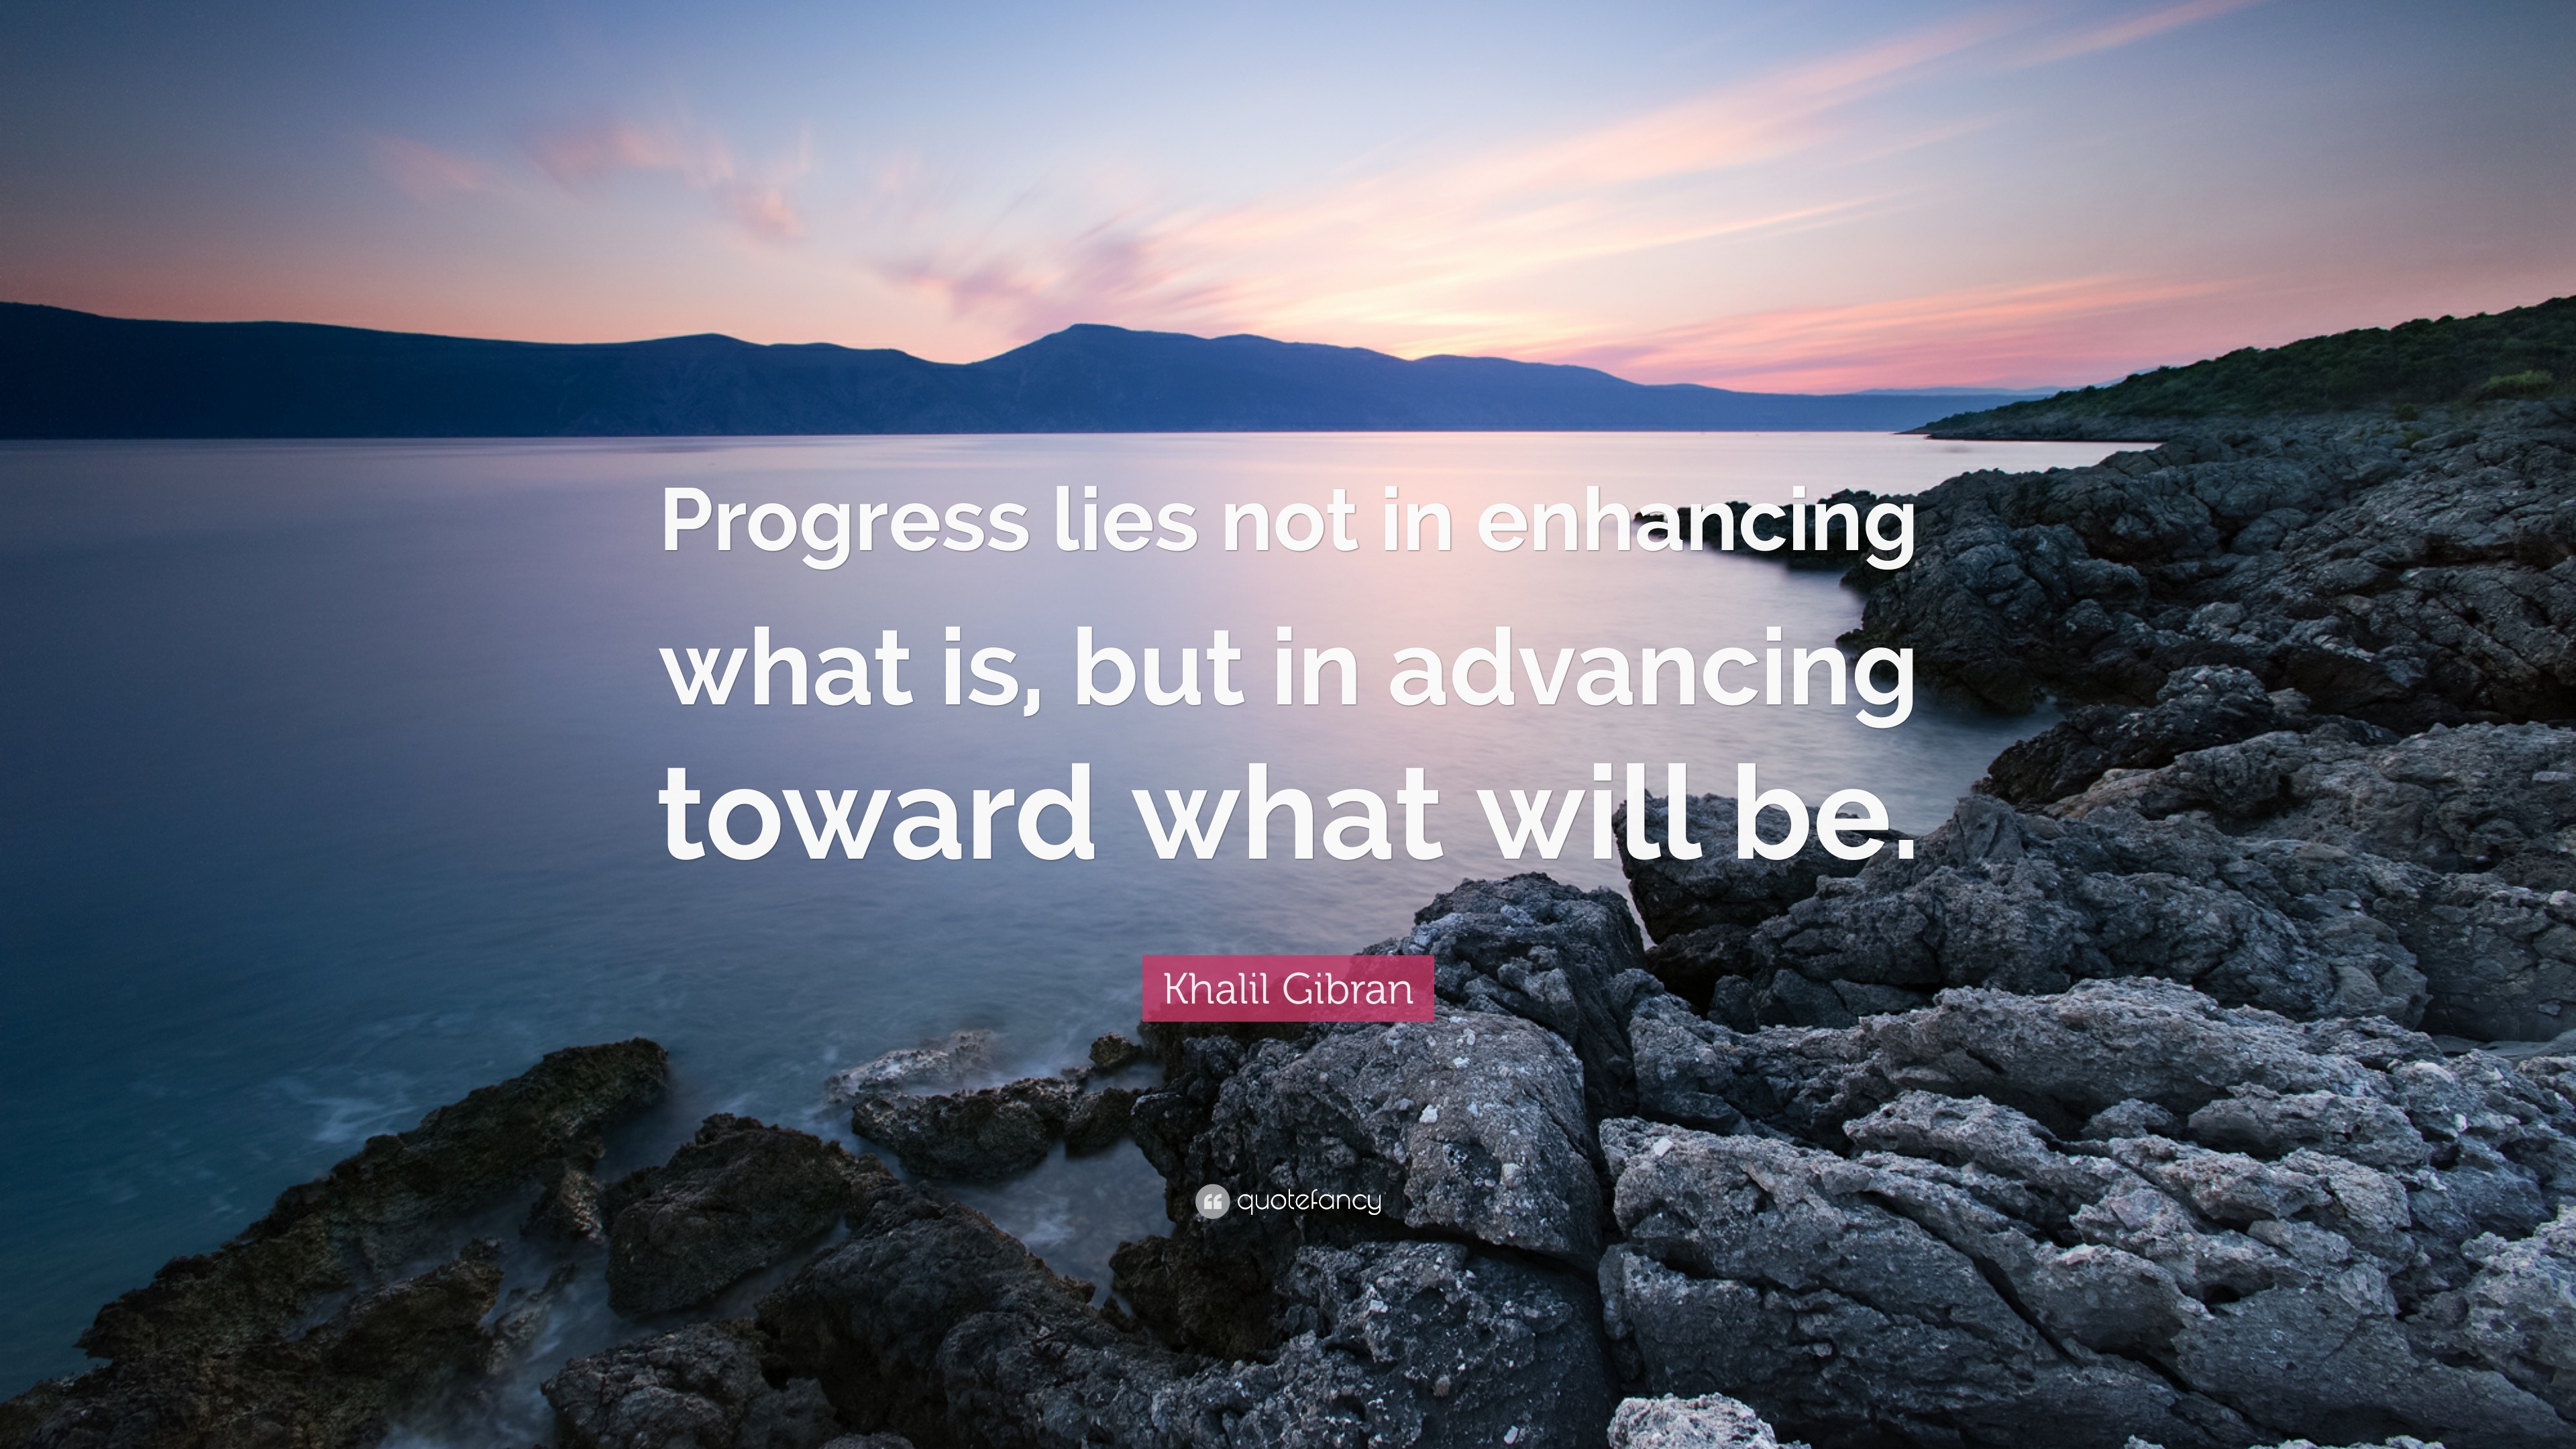 Khalil Gibran Quote: “Progress lies not in enhancing what is, but in ...